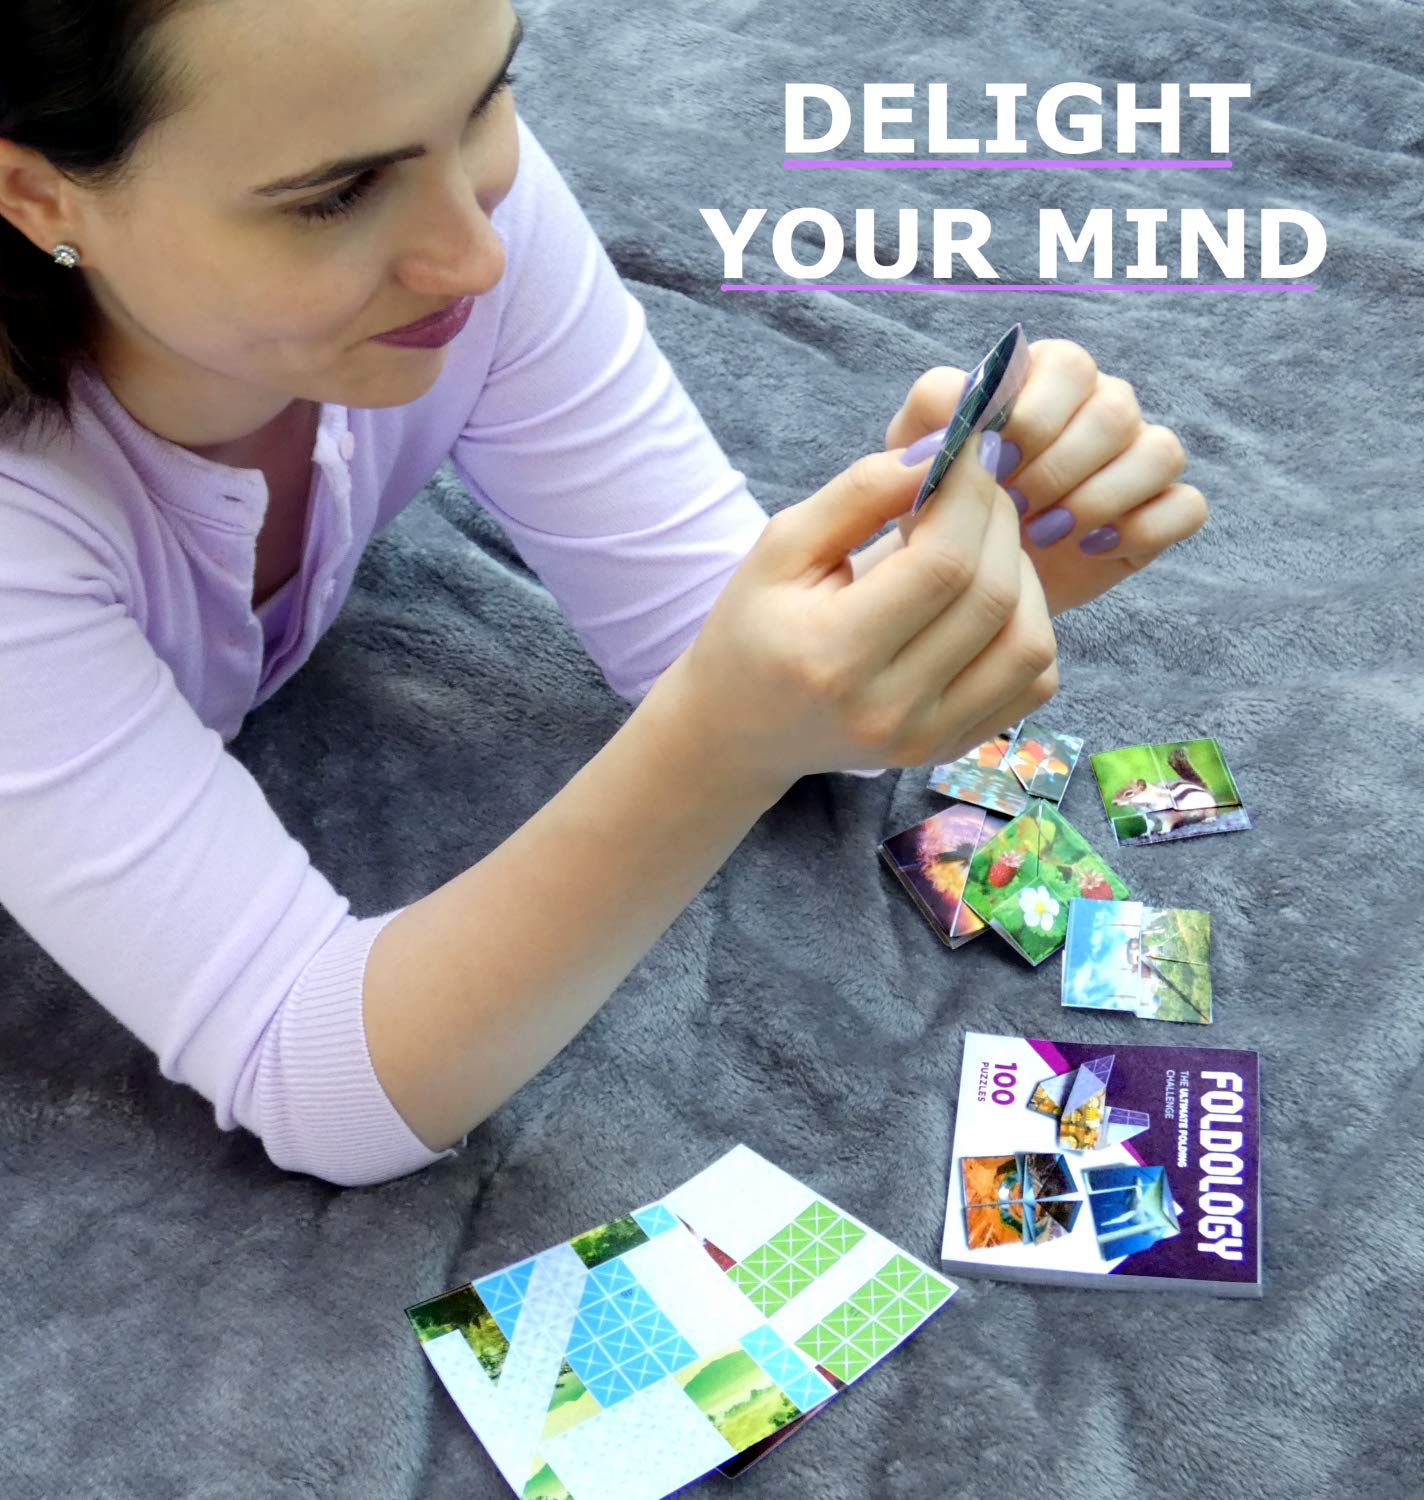 Foldology - The Origami Puzzle Game! Hands-On Brain Teasers for Tweens, Teens & Adults. Fold the Paper to Complete the Picture. 100 Challenges from Easy to Expert. Ages 10+